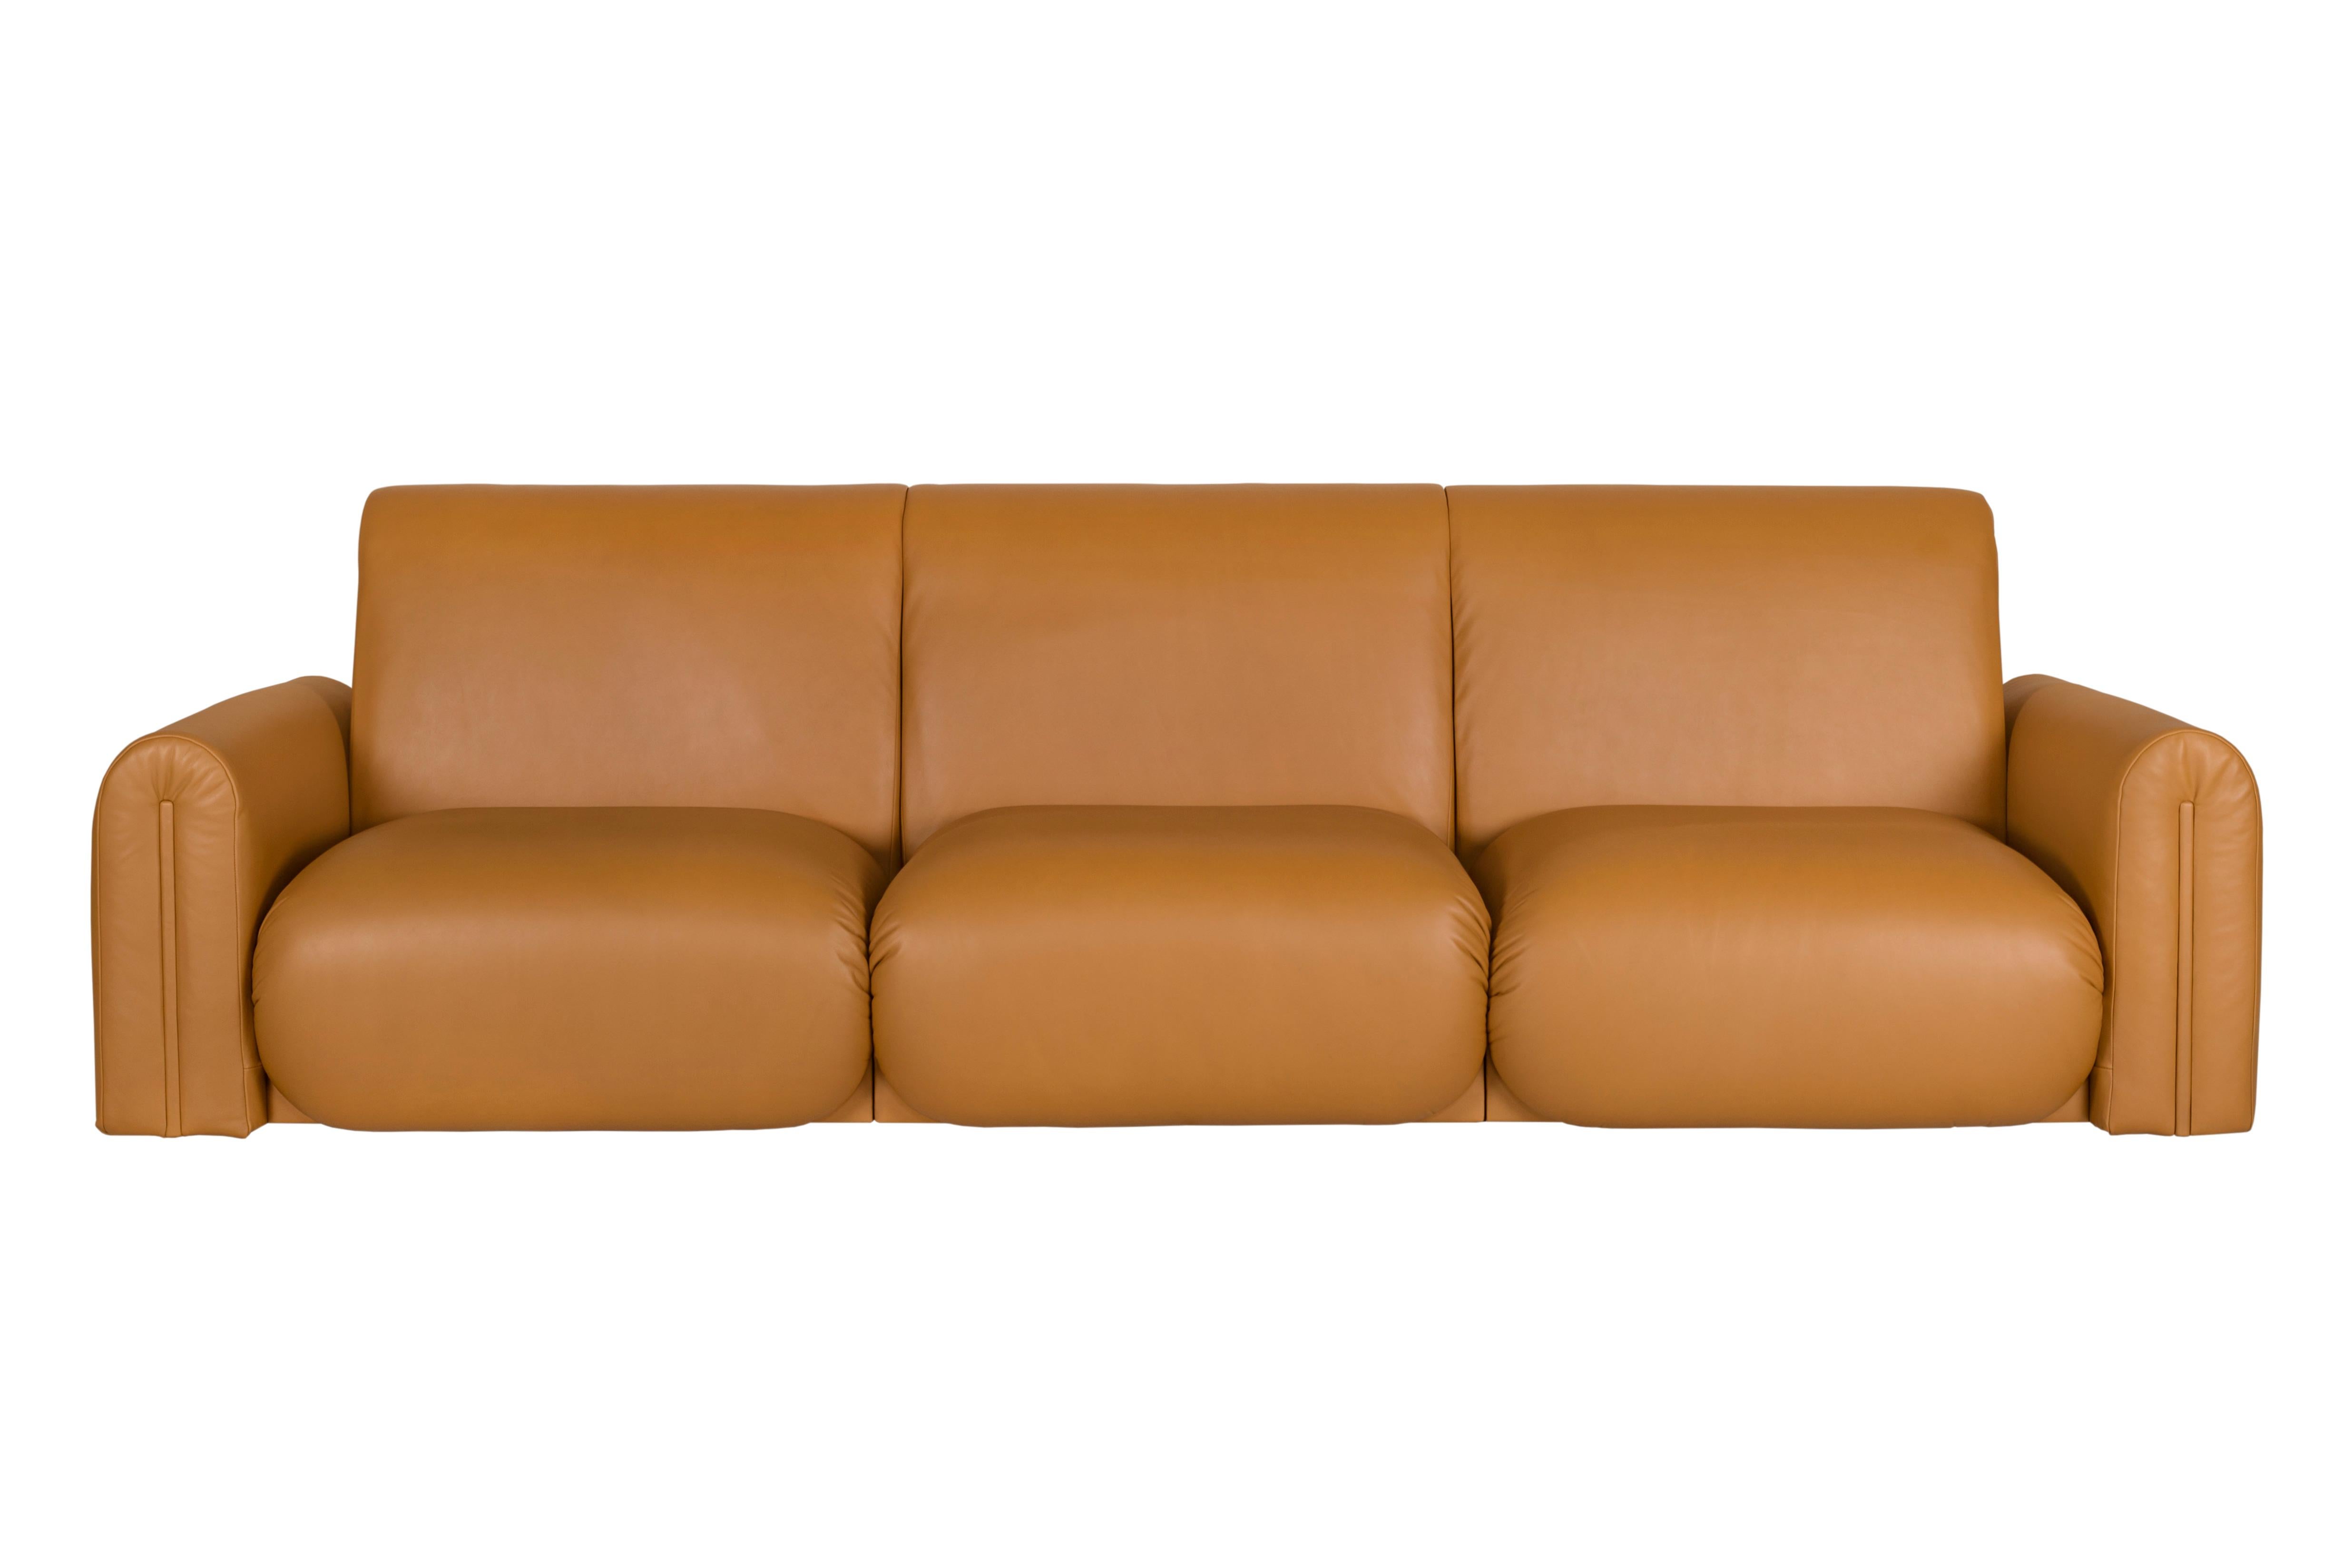 Beijinho 4-seat sofa, Contemporary Collection, Handcrafted in Portugal - Europe by Greenapple.

The Beijinho leather sofa seamlessly combines the soft texture of high-quality leather and enveloping, tufted comfort, creating a sensory experience